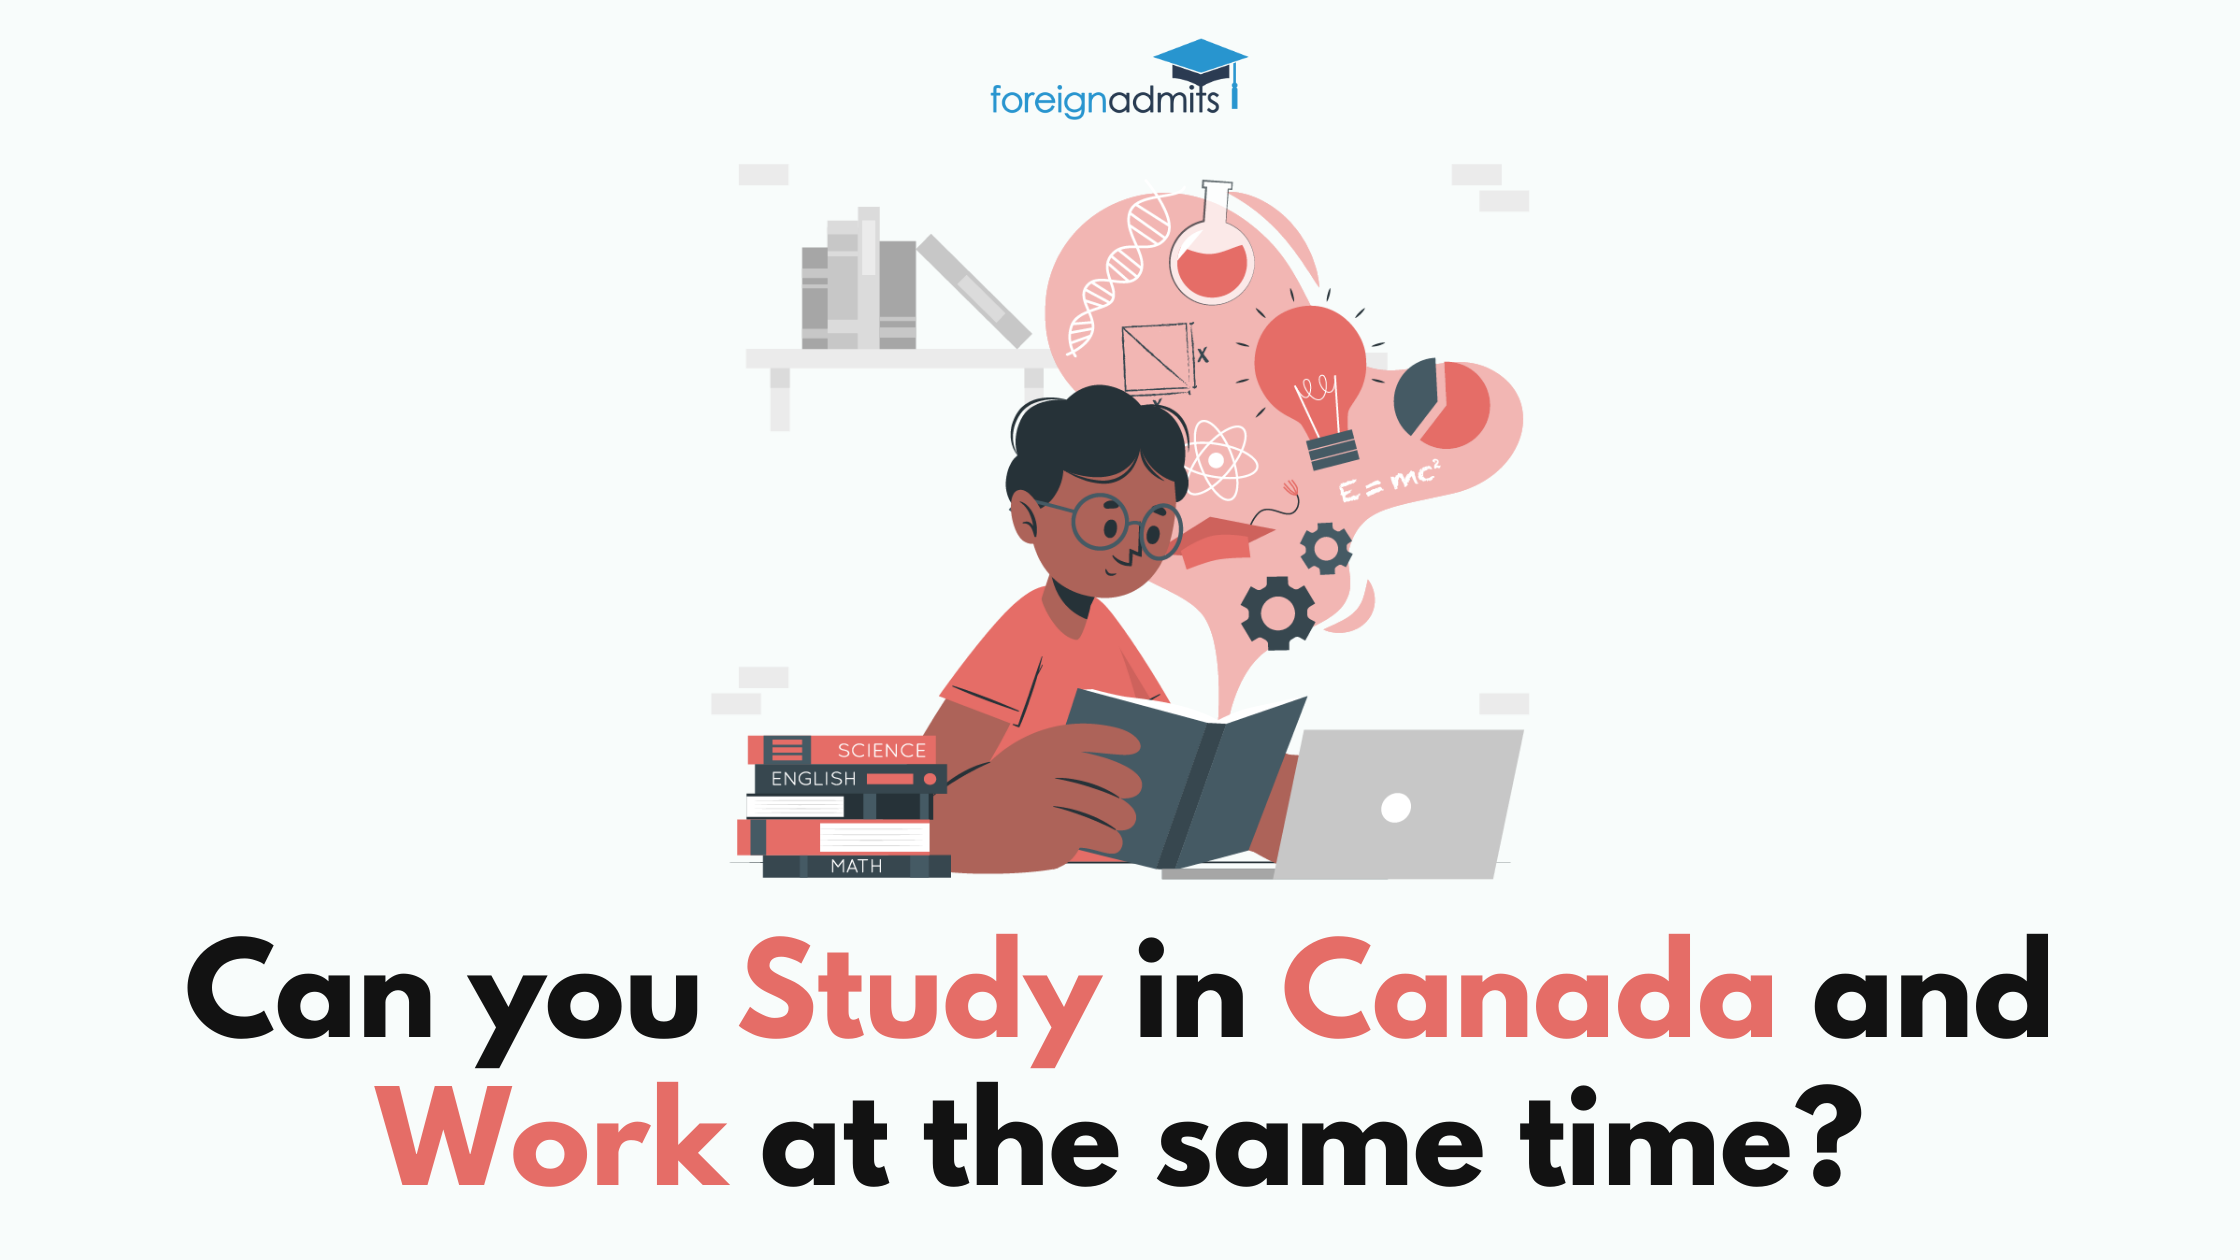 Can you study in Canada and work at the same time?